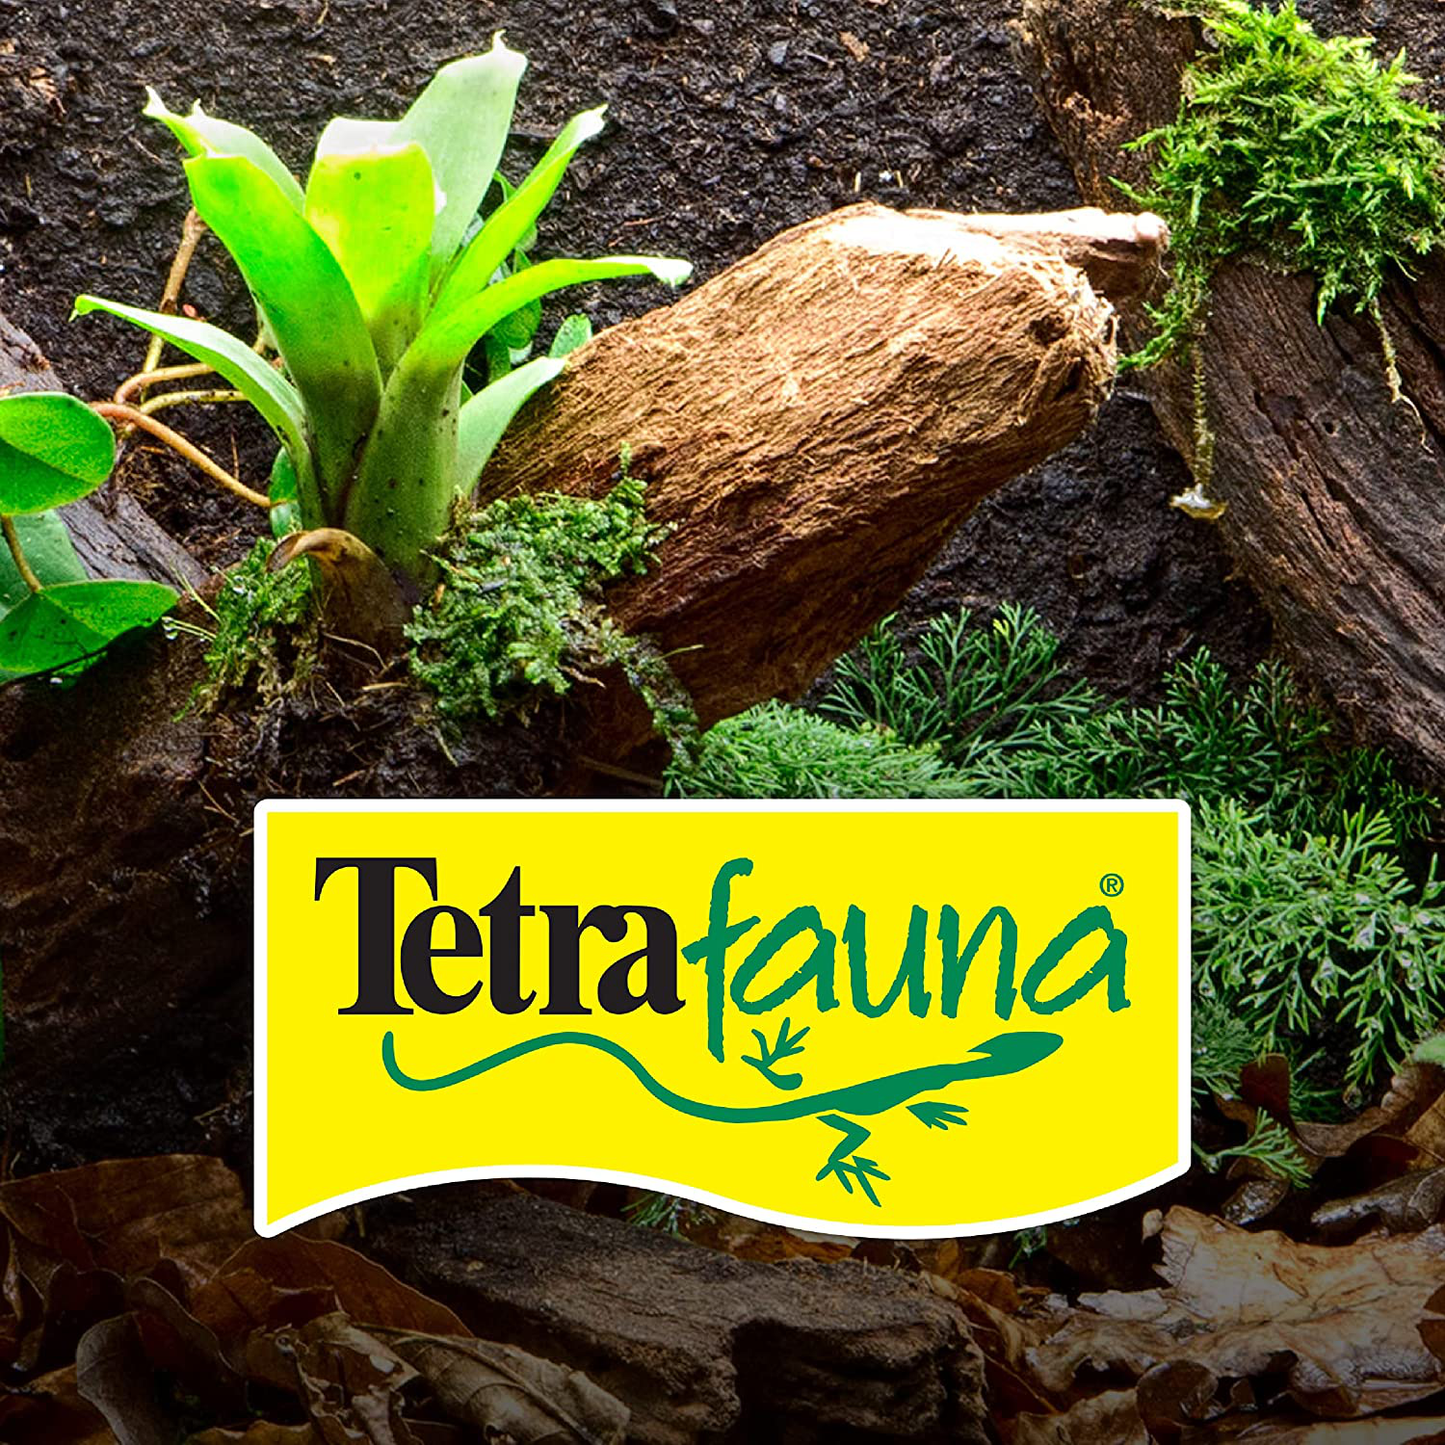 Tetra Reptomin Floating Food Sticks for Aquatic Turtles, Newts and Frogs Animals & Pet Supplies > Pet Supplies > Reptile & Amphibian Supplies > Reptile & Amphibian Food Tetra   